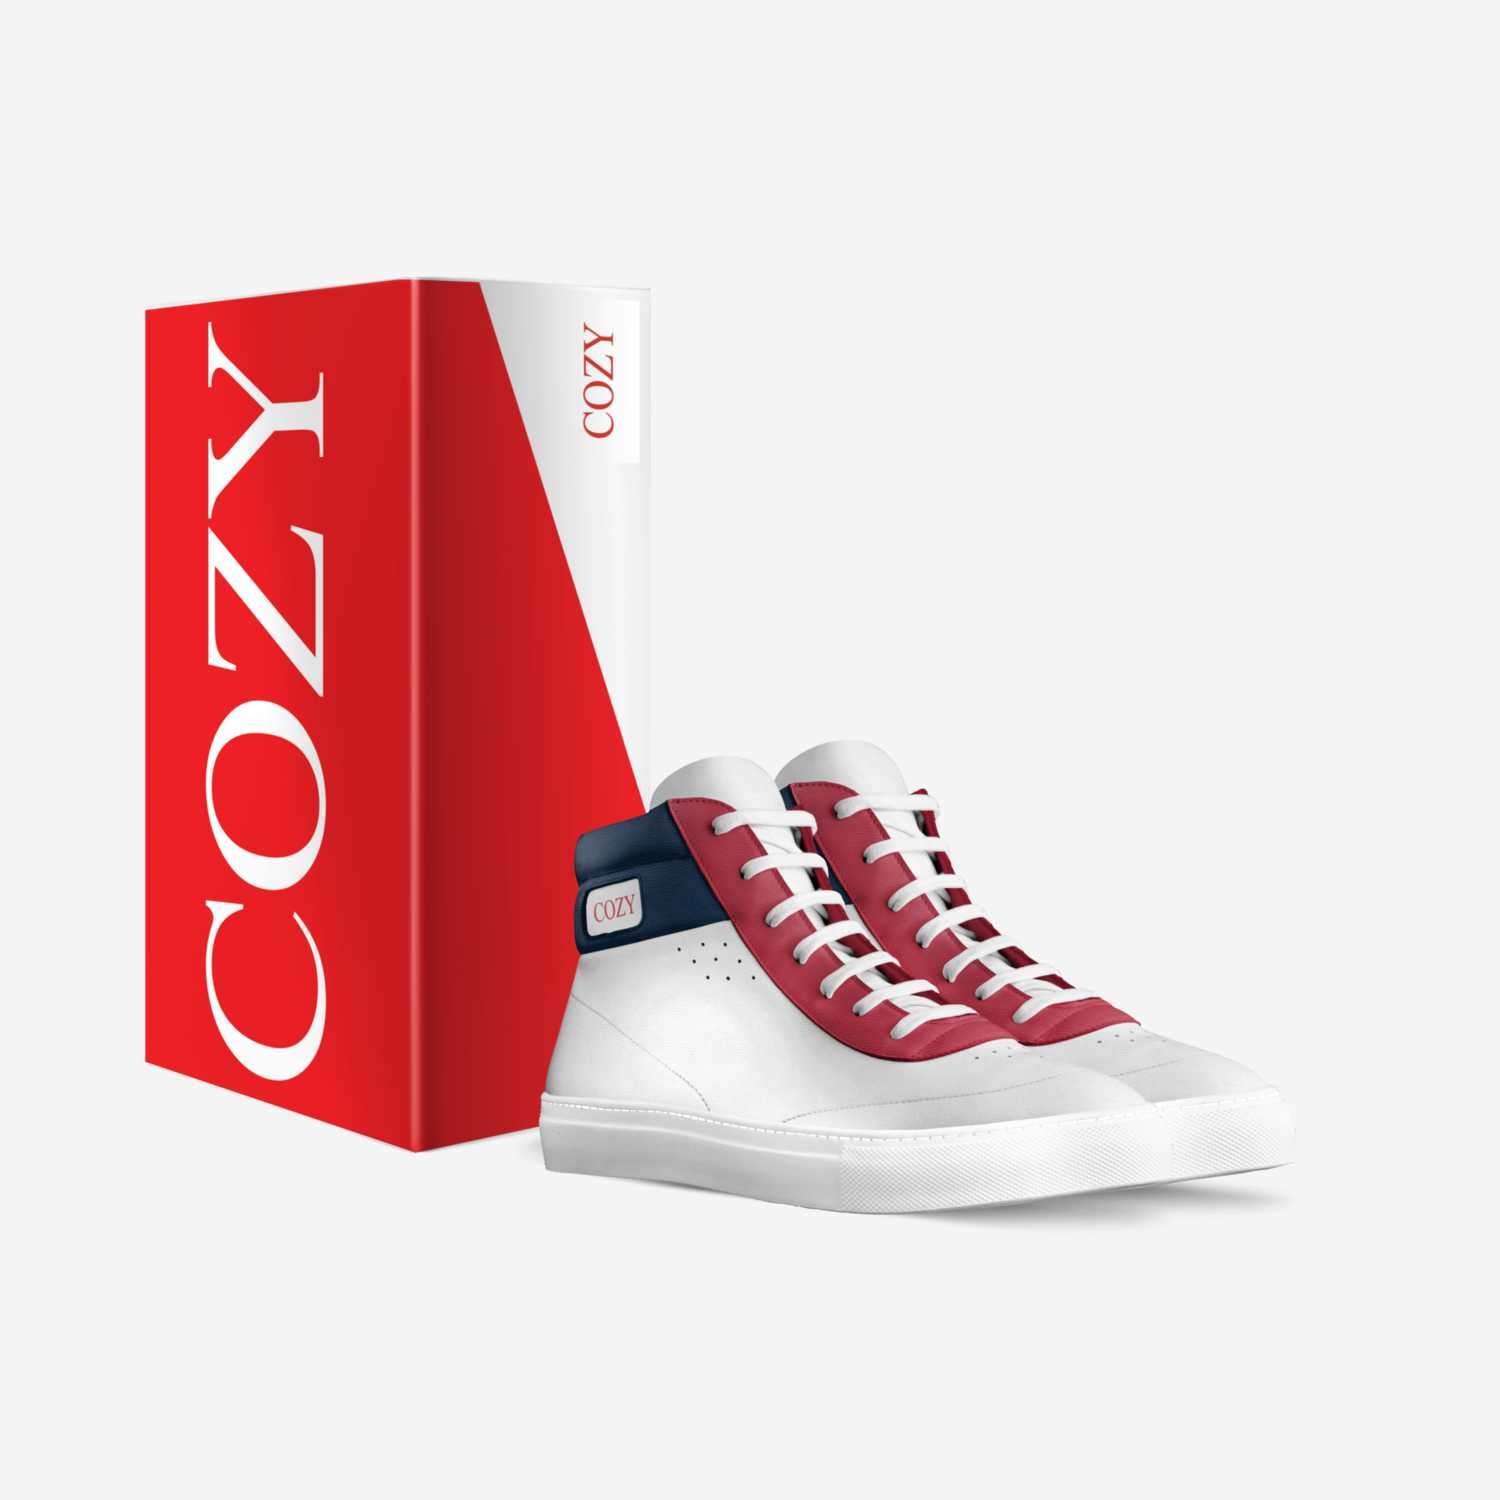 COZY KICKS 3 custom made in Italy shoes by Charles Mcusa | Box view